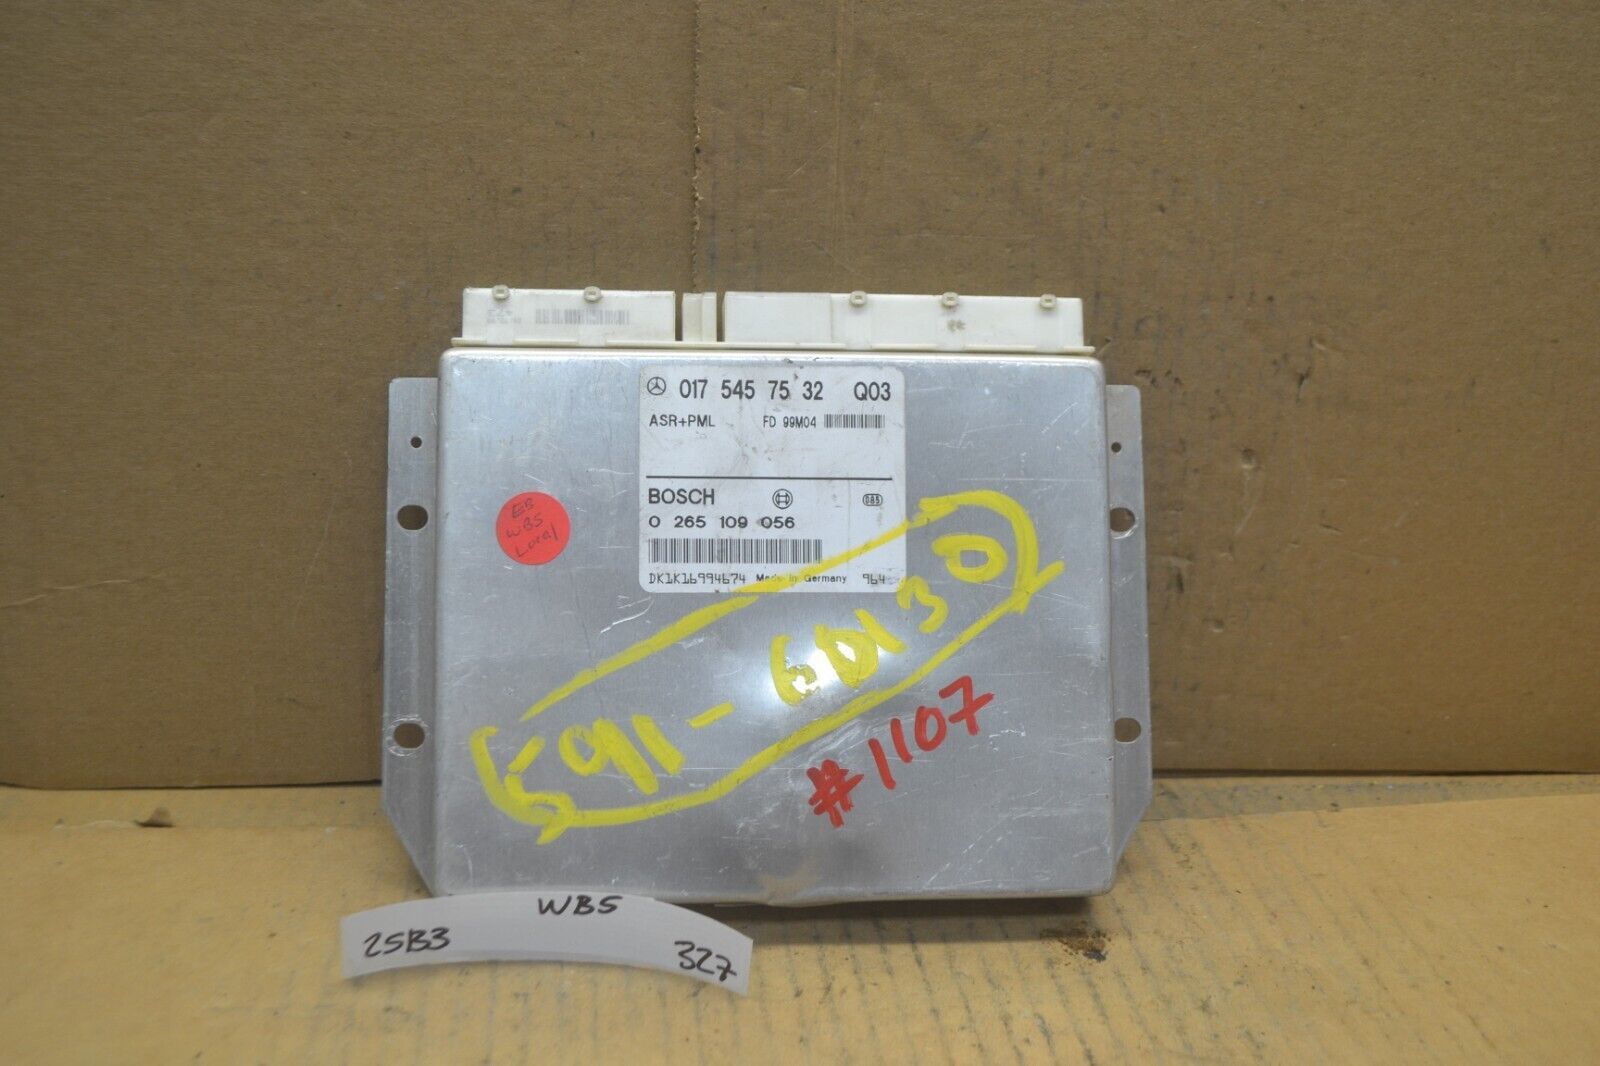 Primary image for 1998 1999 Mercedes E Class ABS Control Unit OEM 0175457532 Module 327-25b3